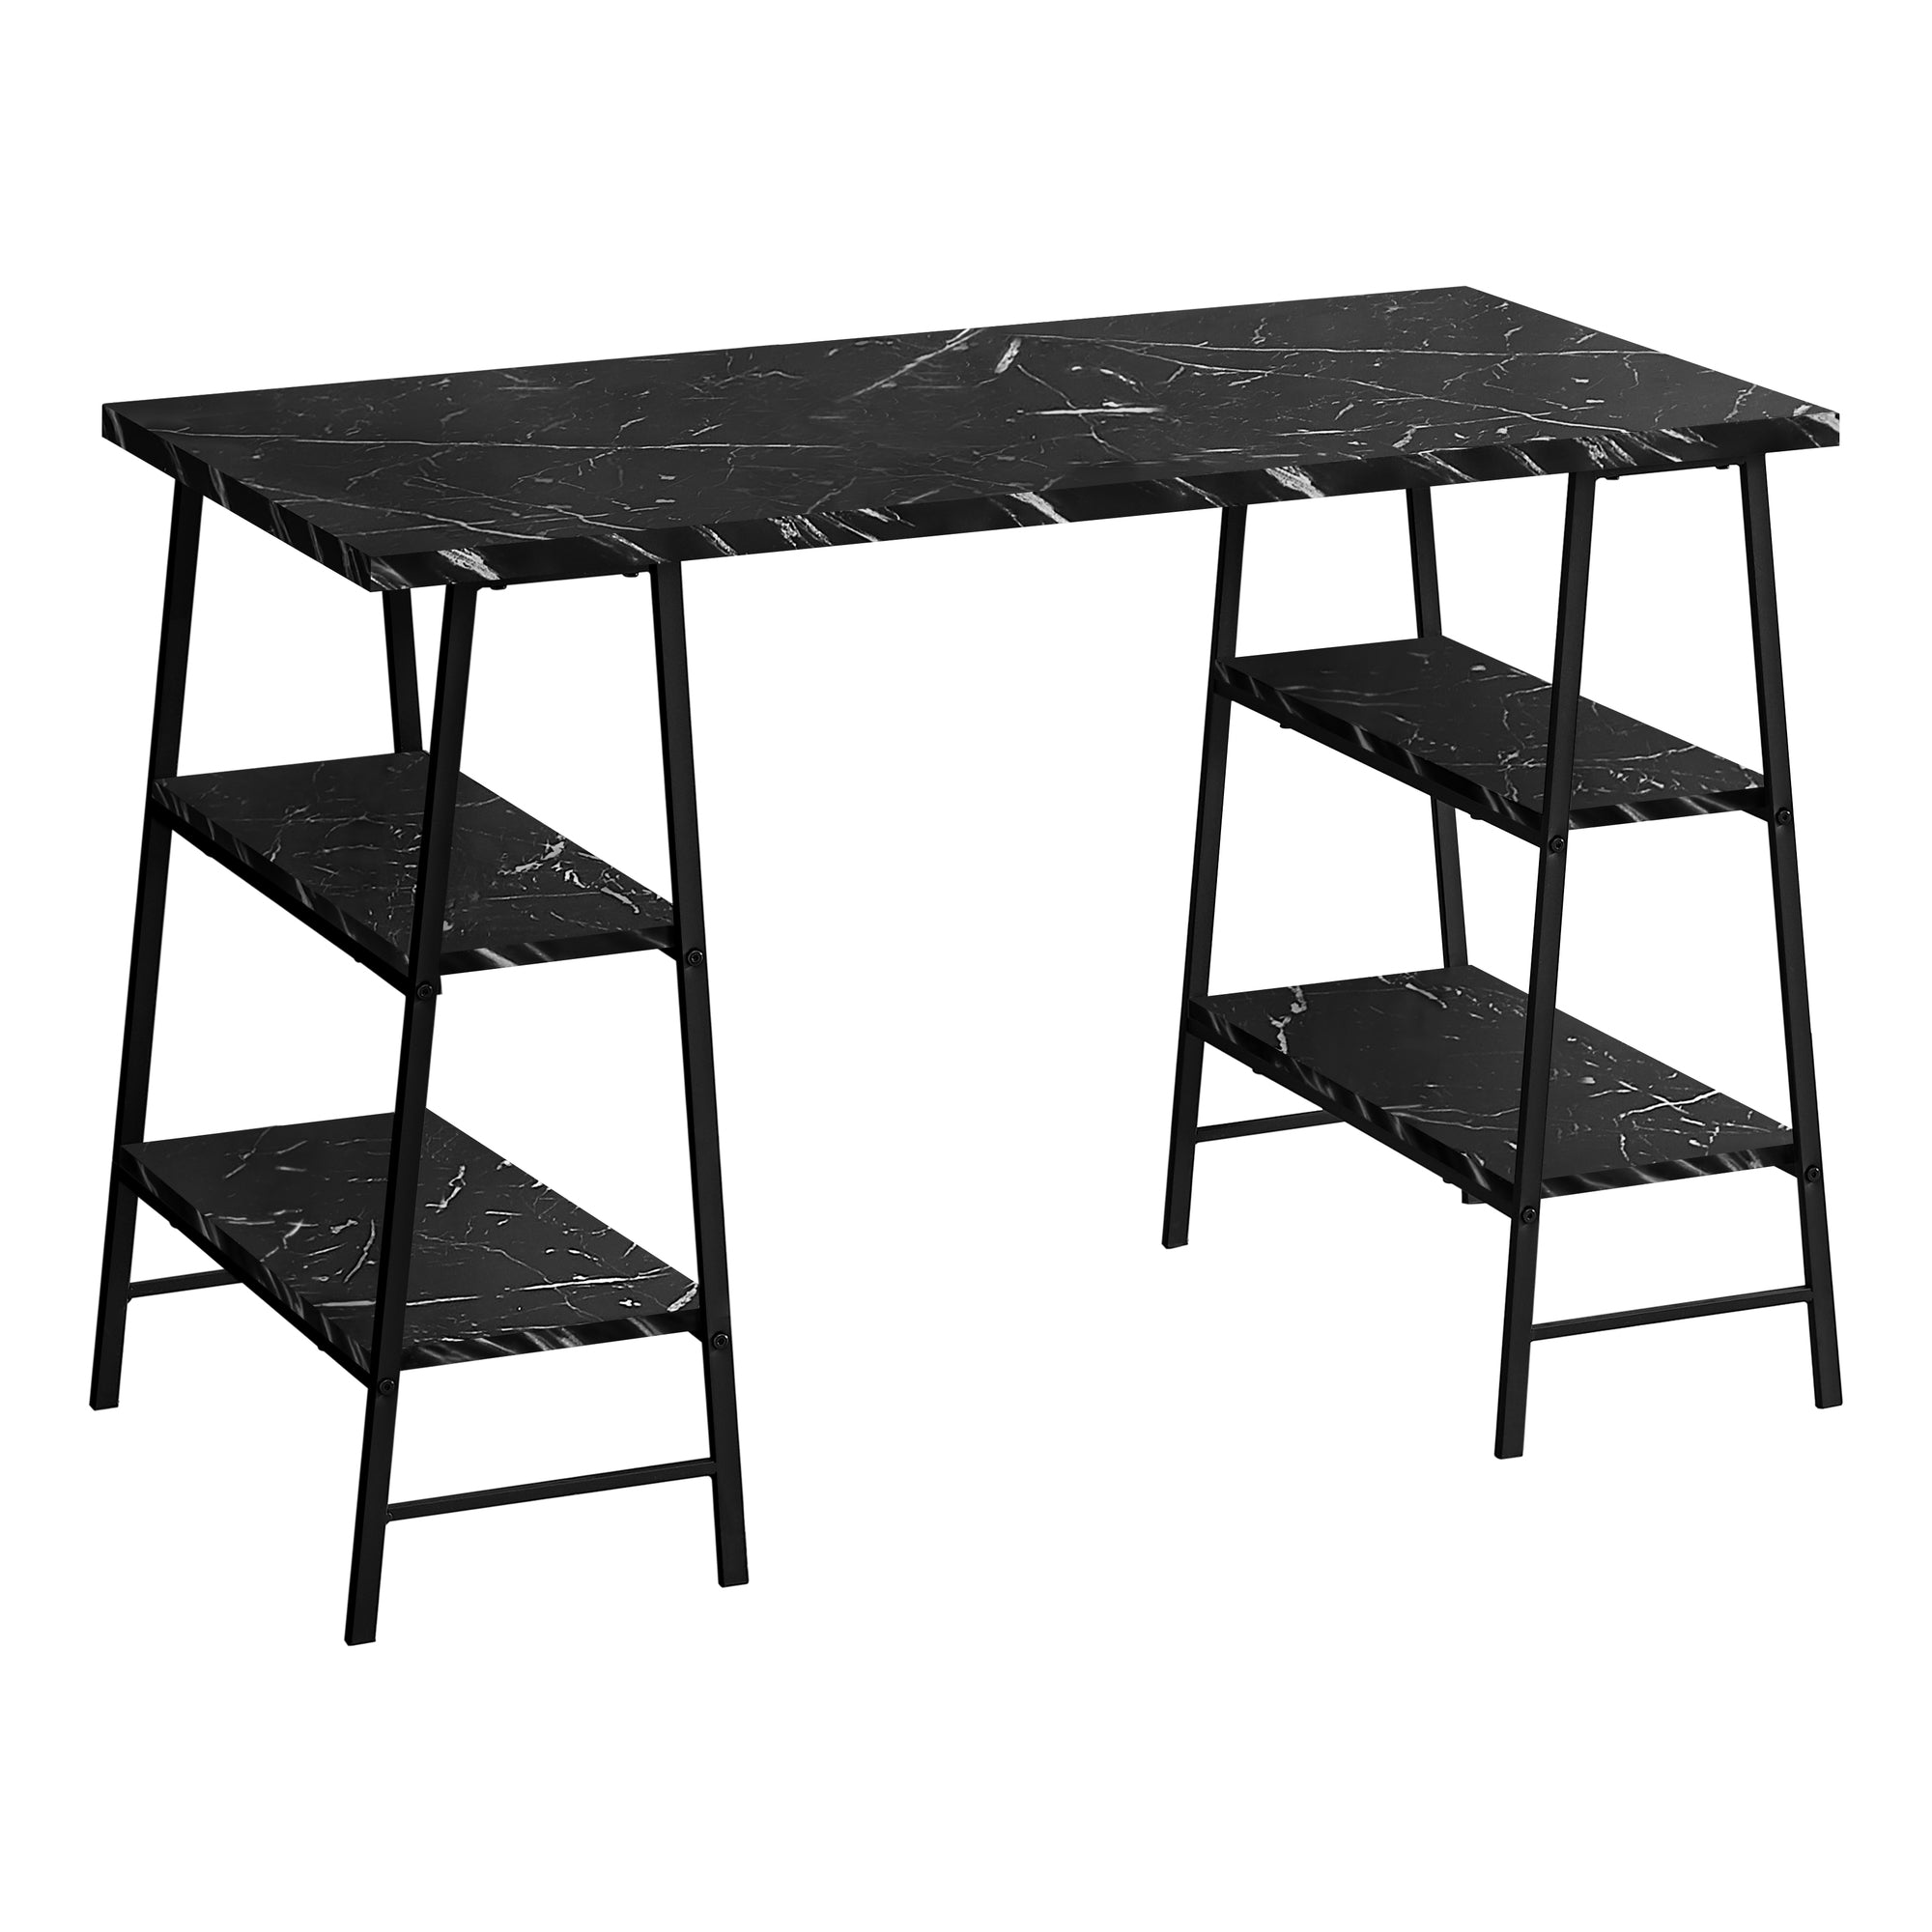 MN-627528    Computer Desk, Home Office, Laptop, Storage Shelves, 48"L, Metal, Laminate, Black Marble-Look, Contemporary, Glam, Industrial, Modern